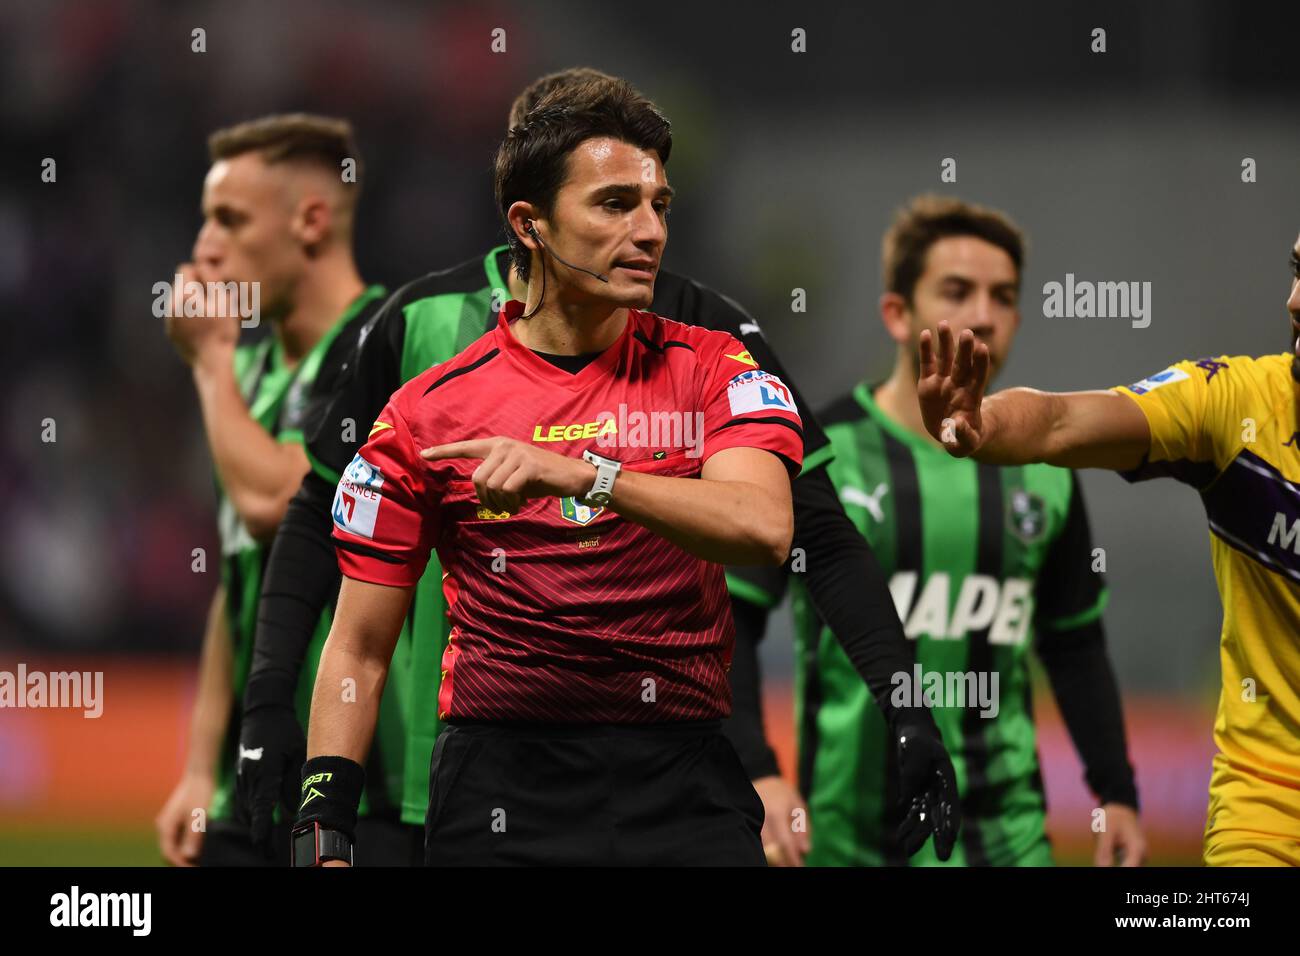 Referee Nicolo Marini speaks with AC Milan players during the News Photo  - Getty Images